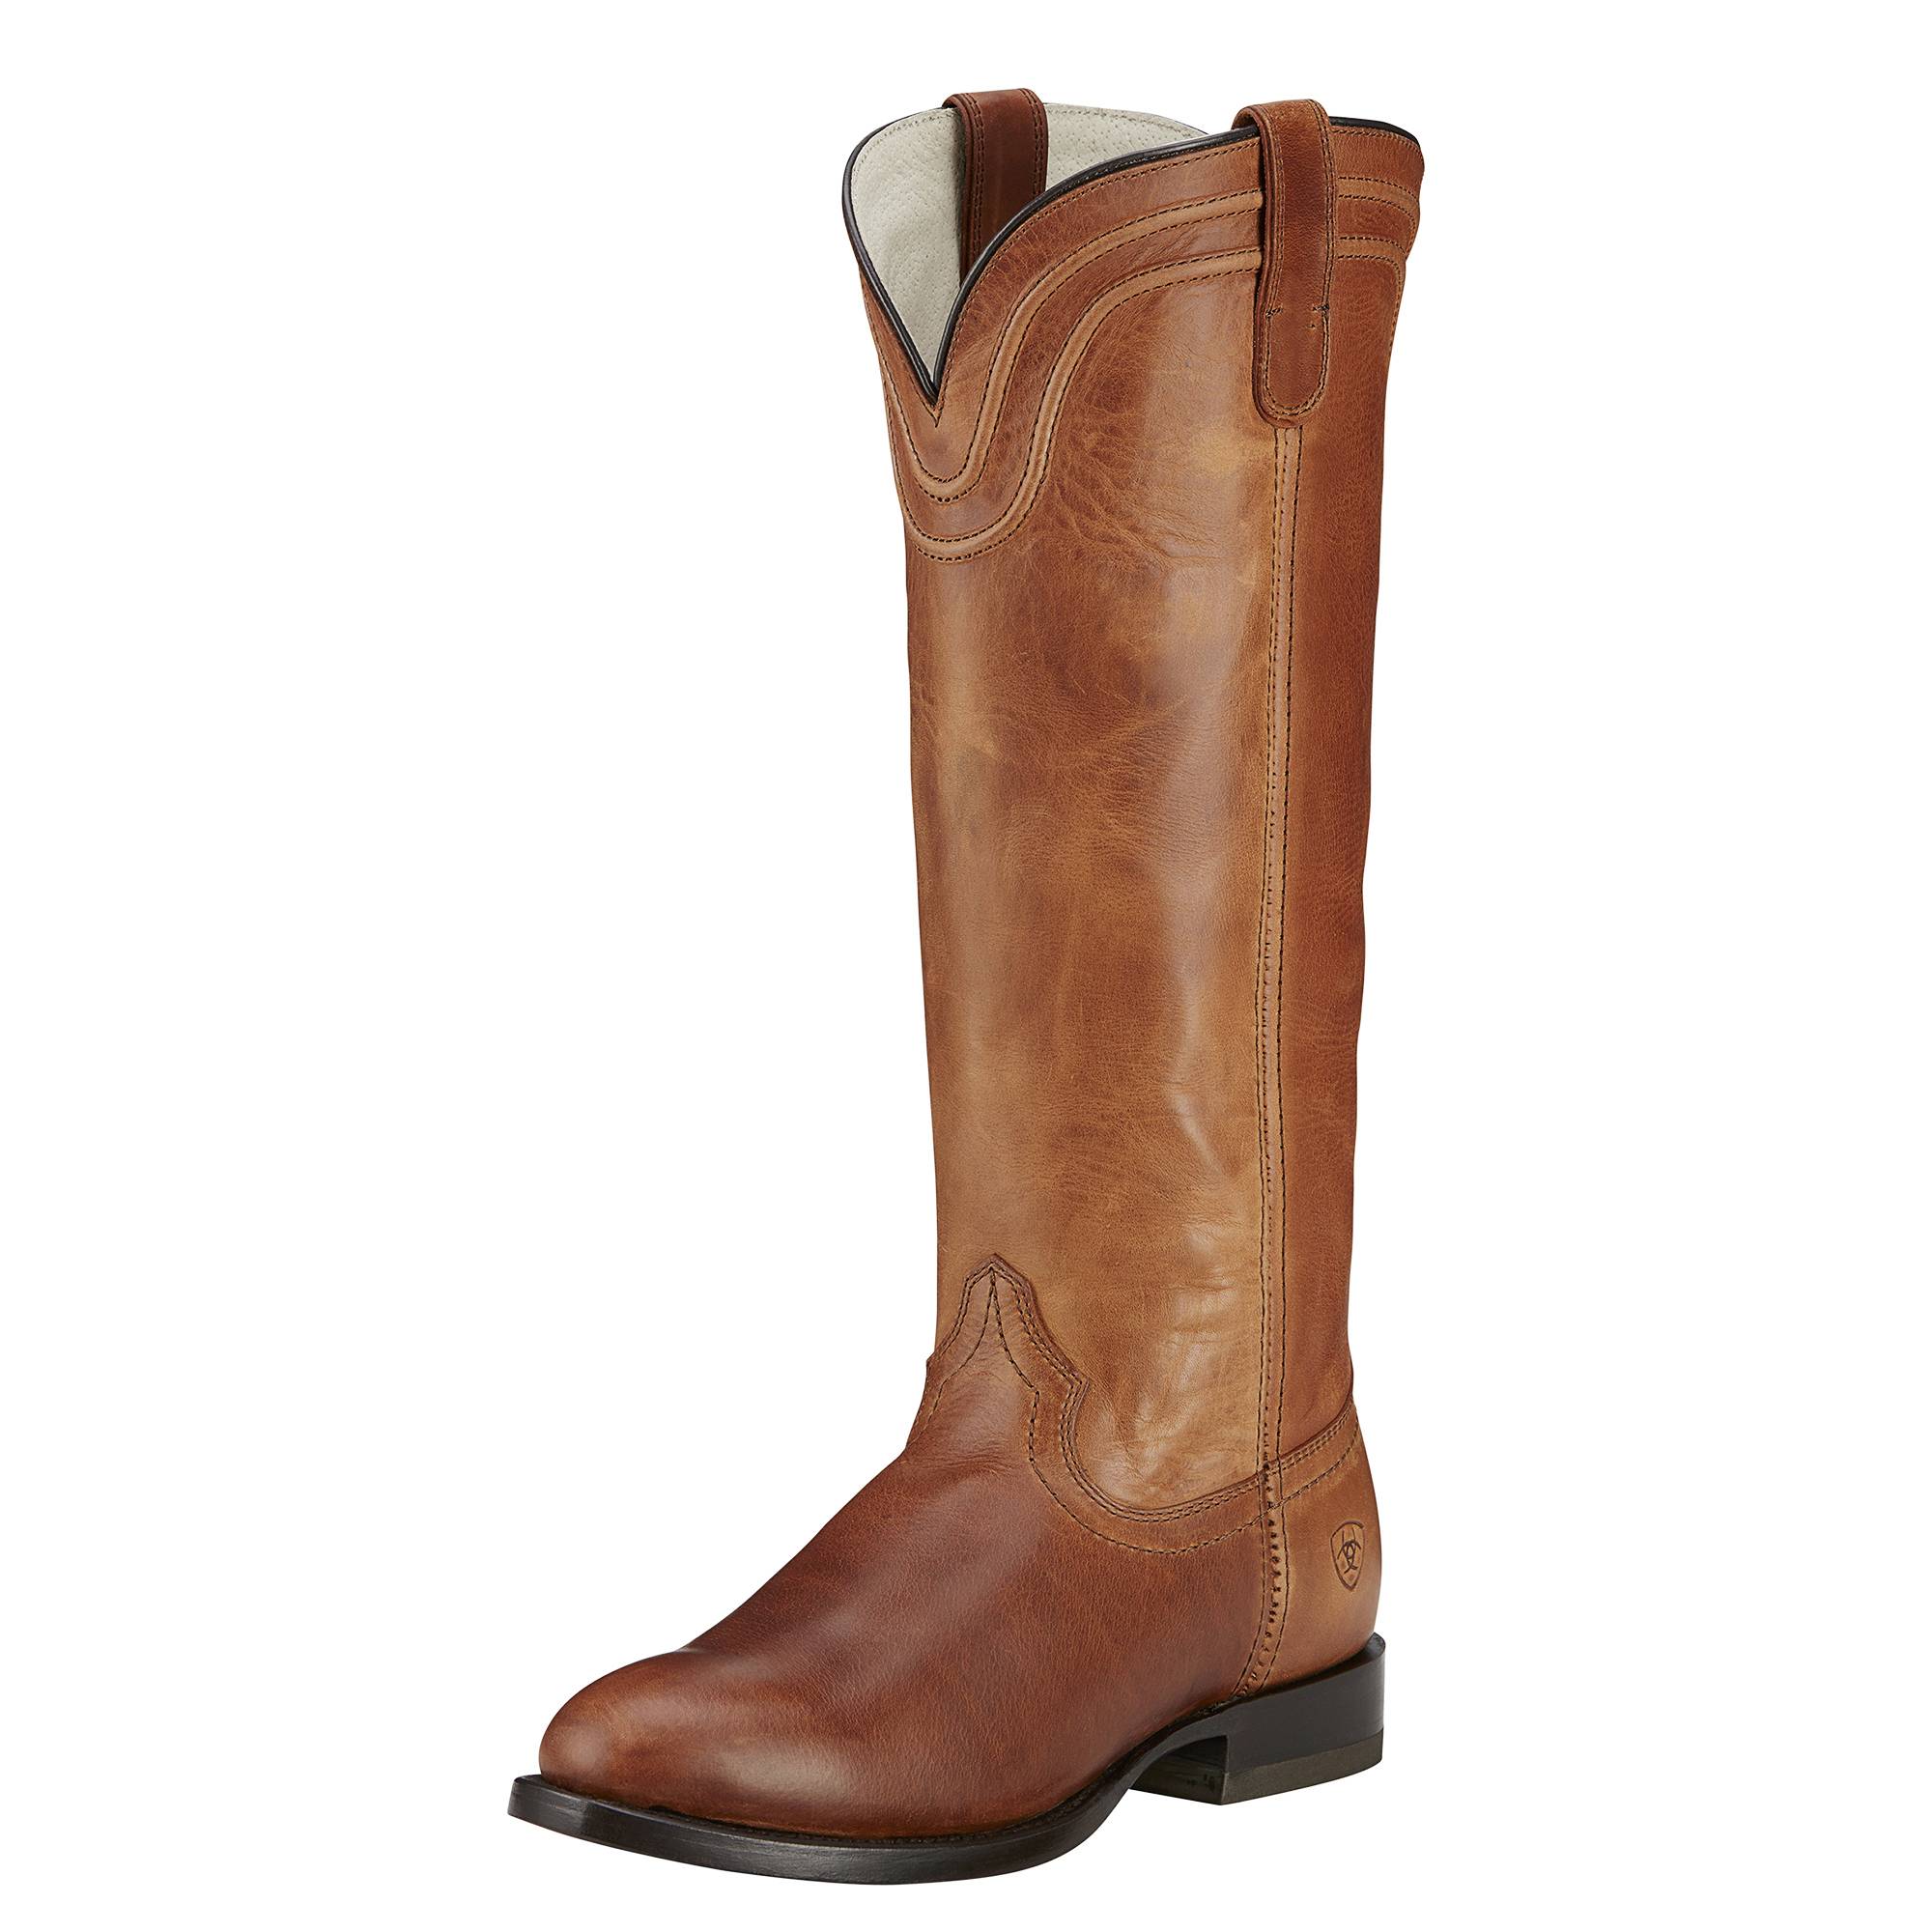 Ariat About Town Boots Ladies Brown